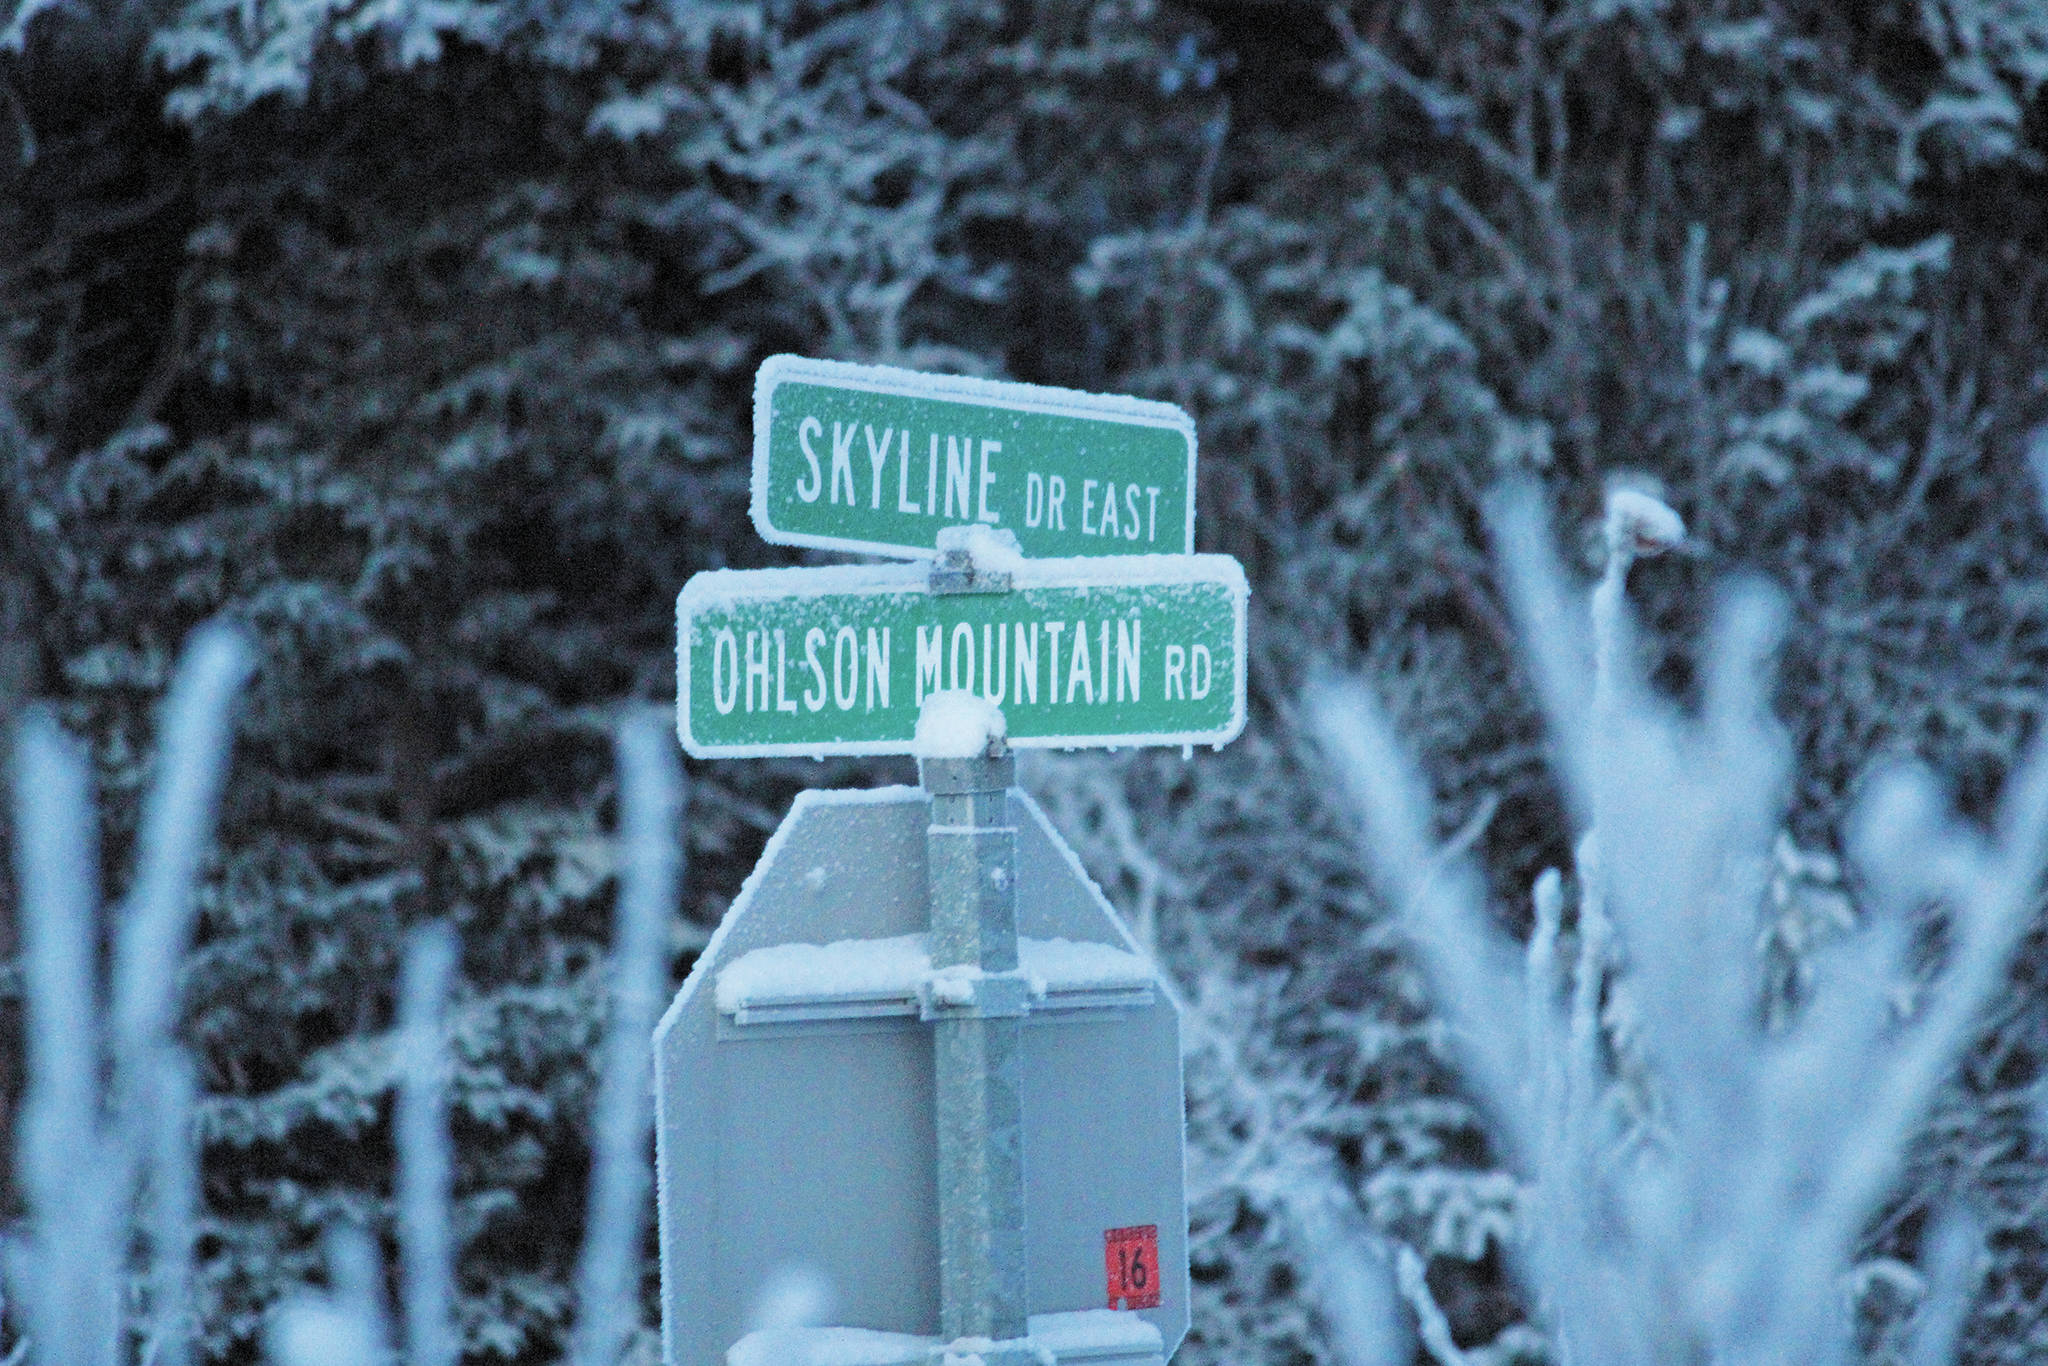 The intersection of Skyline Drive and Ohlson Mountain Road, seen here Thursday, Dec. 10, 2020 outside Homer, Alaska. Residents of Ohlson Mountain Road have concerns about safety and speeding in the area, and the Kenai Peninsula Borough Assembly has formally asked the Alaska Department of Transportation and Public Facilities to conduct safety and speed studies on the road. (Photo by Megan Pacer/Homer News)